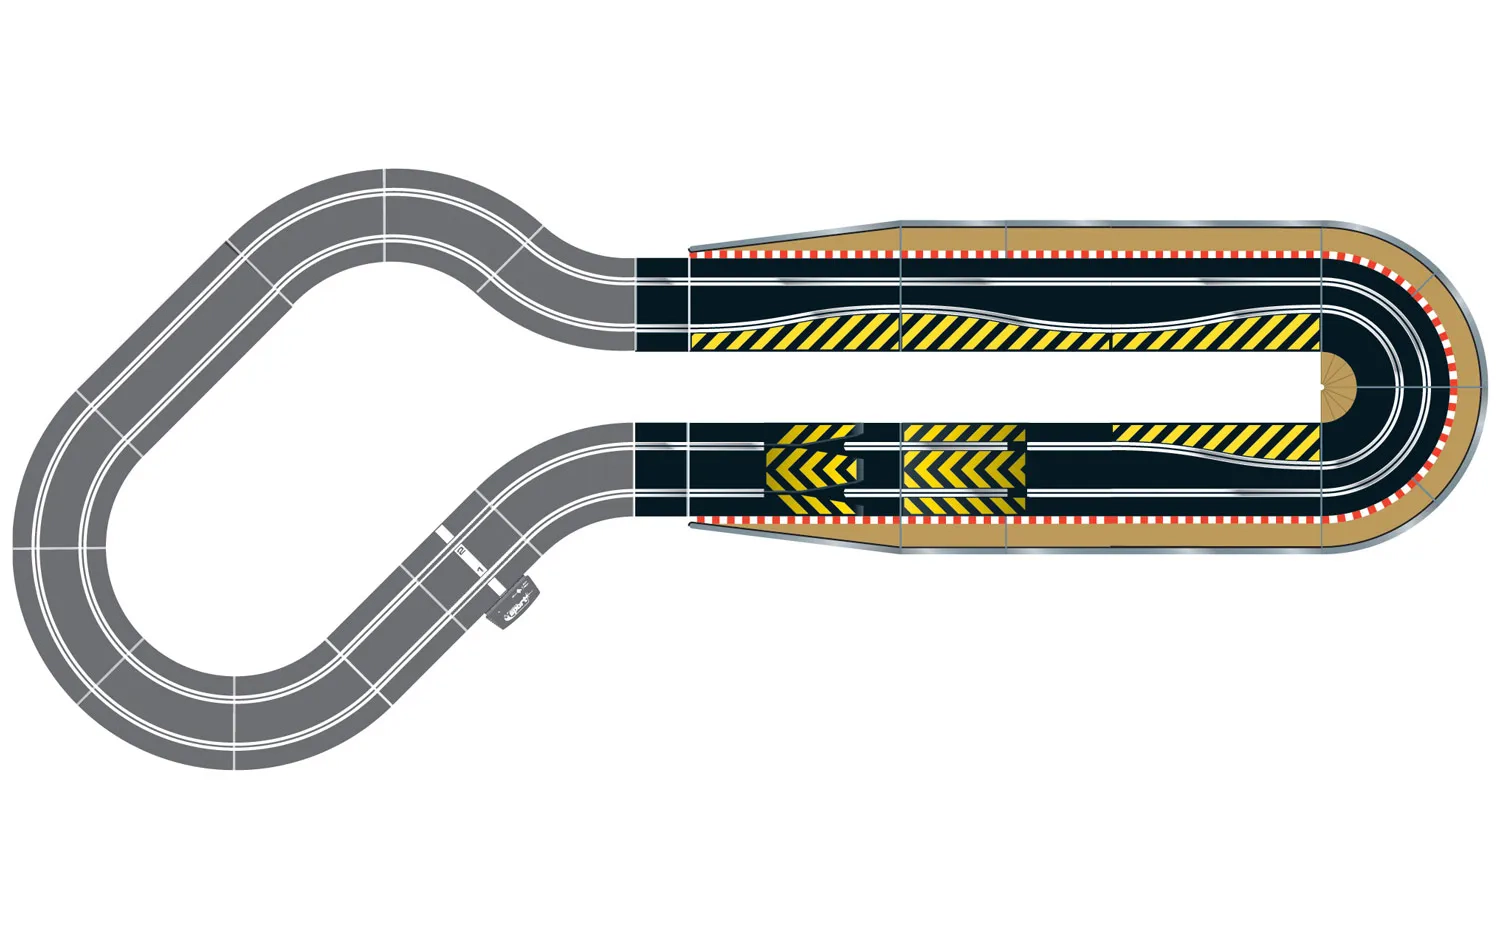 Scalextric Ultimate Track Extension Pack